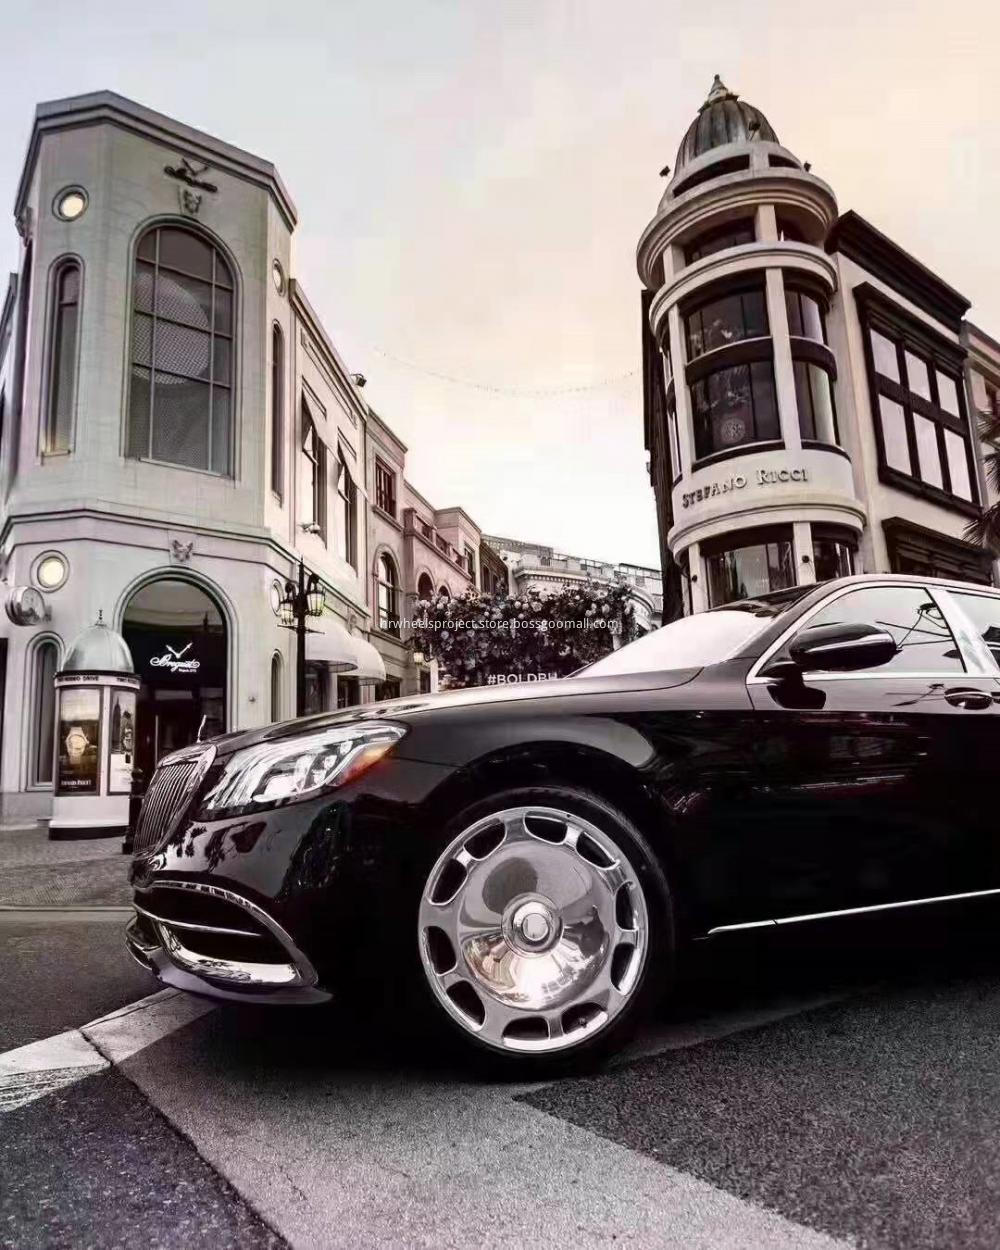 MAYBACH FORGED CHROME WHEEL MERCEDES-BENZ S CLASS RIMS